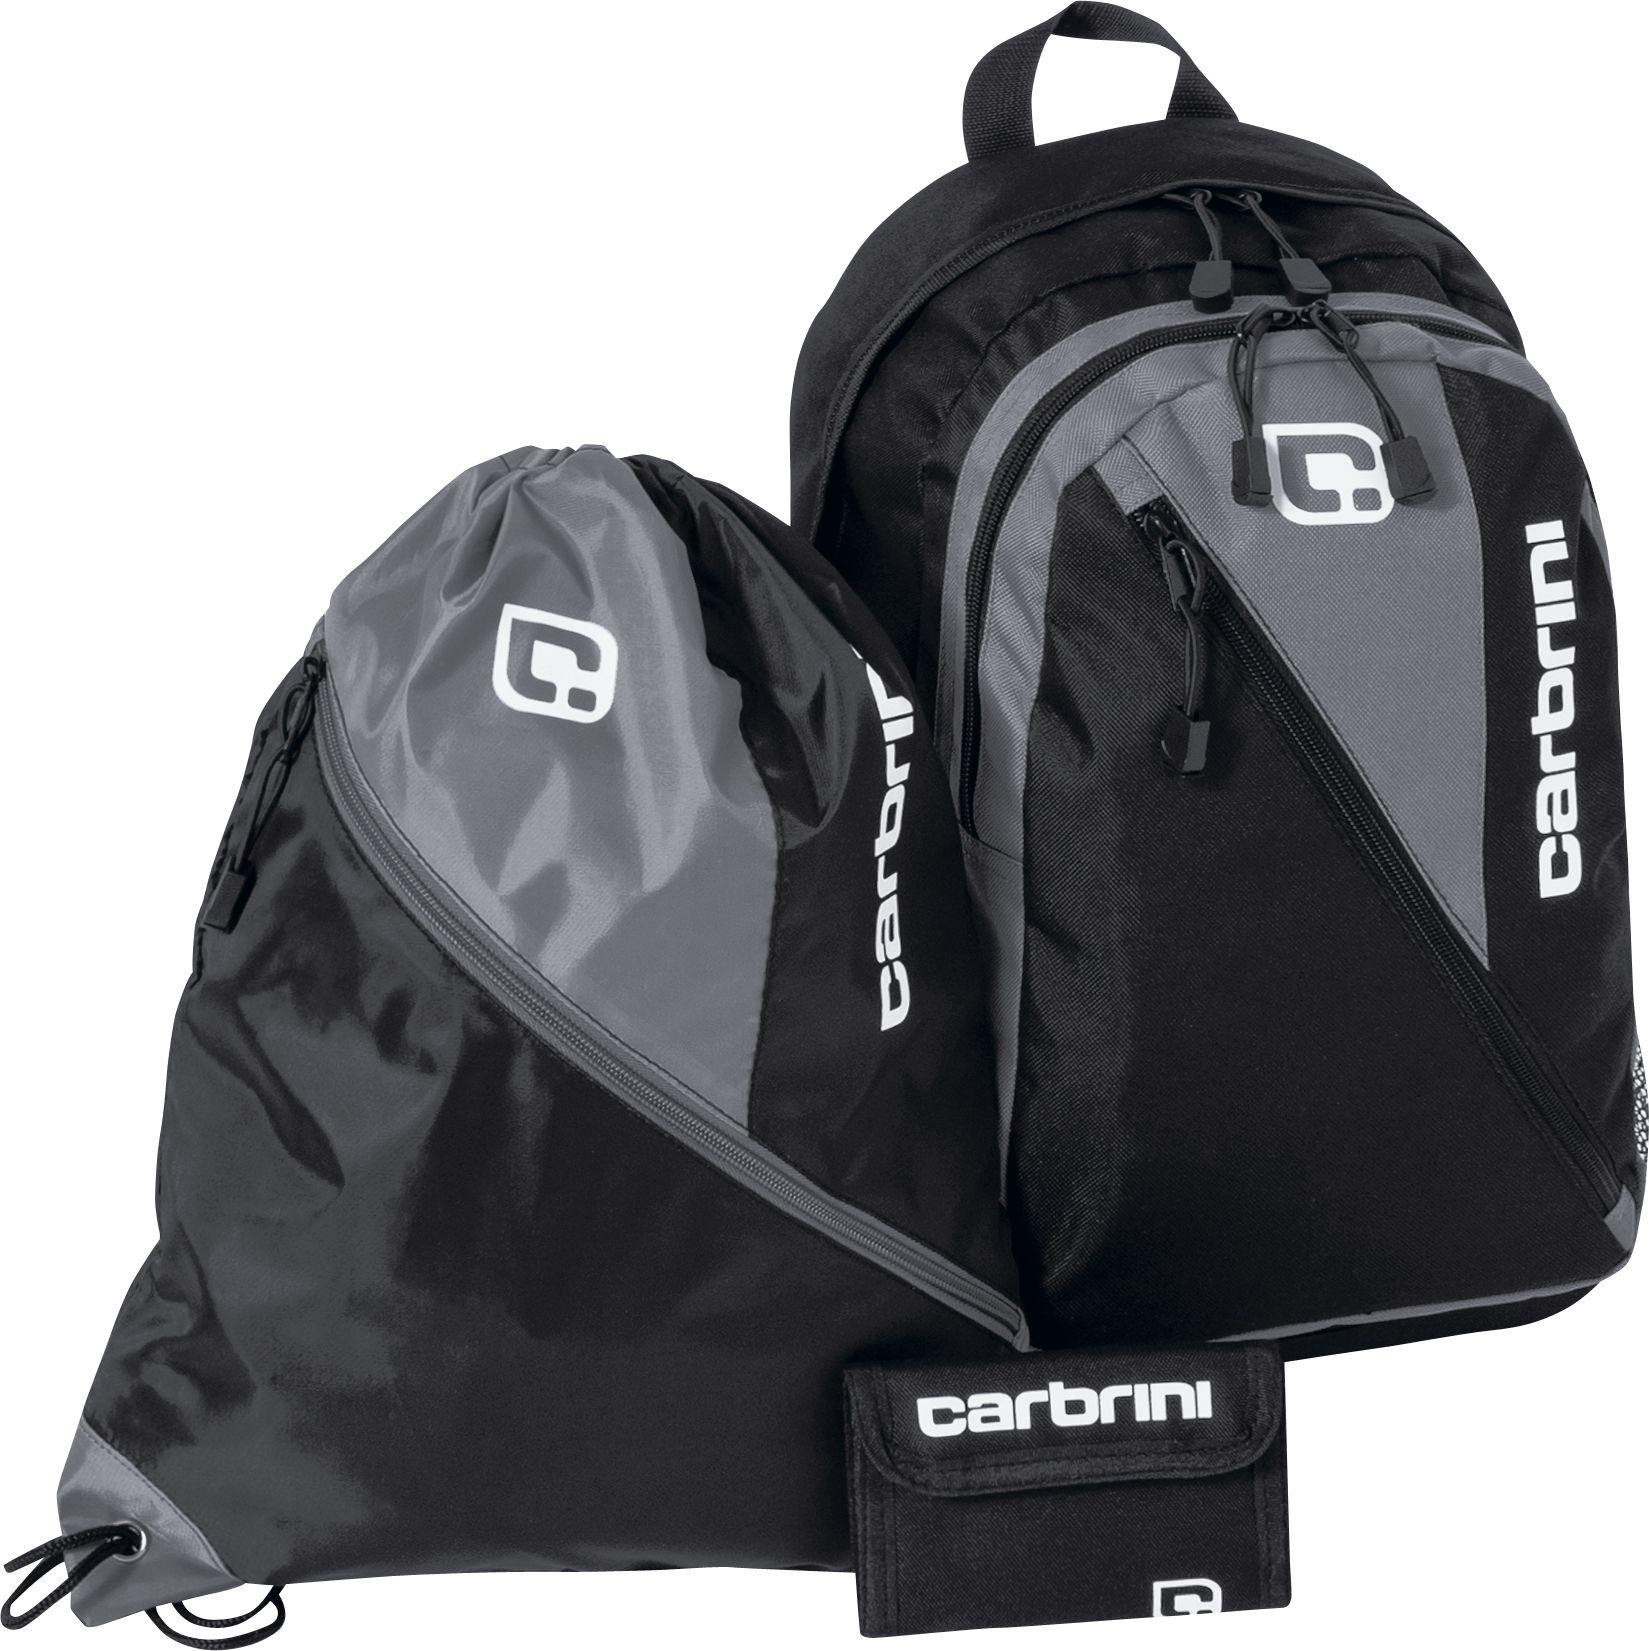 Carbrini - 3 Piece Backpack Set Review